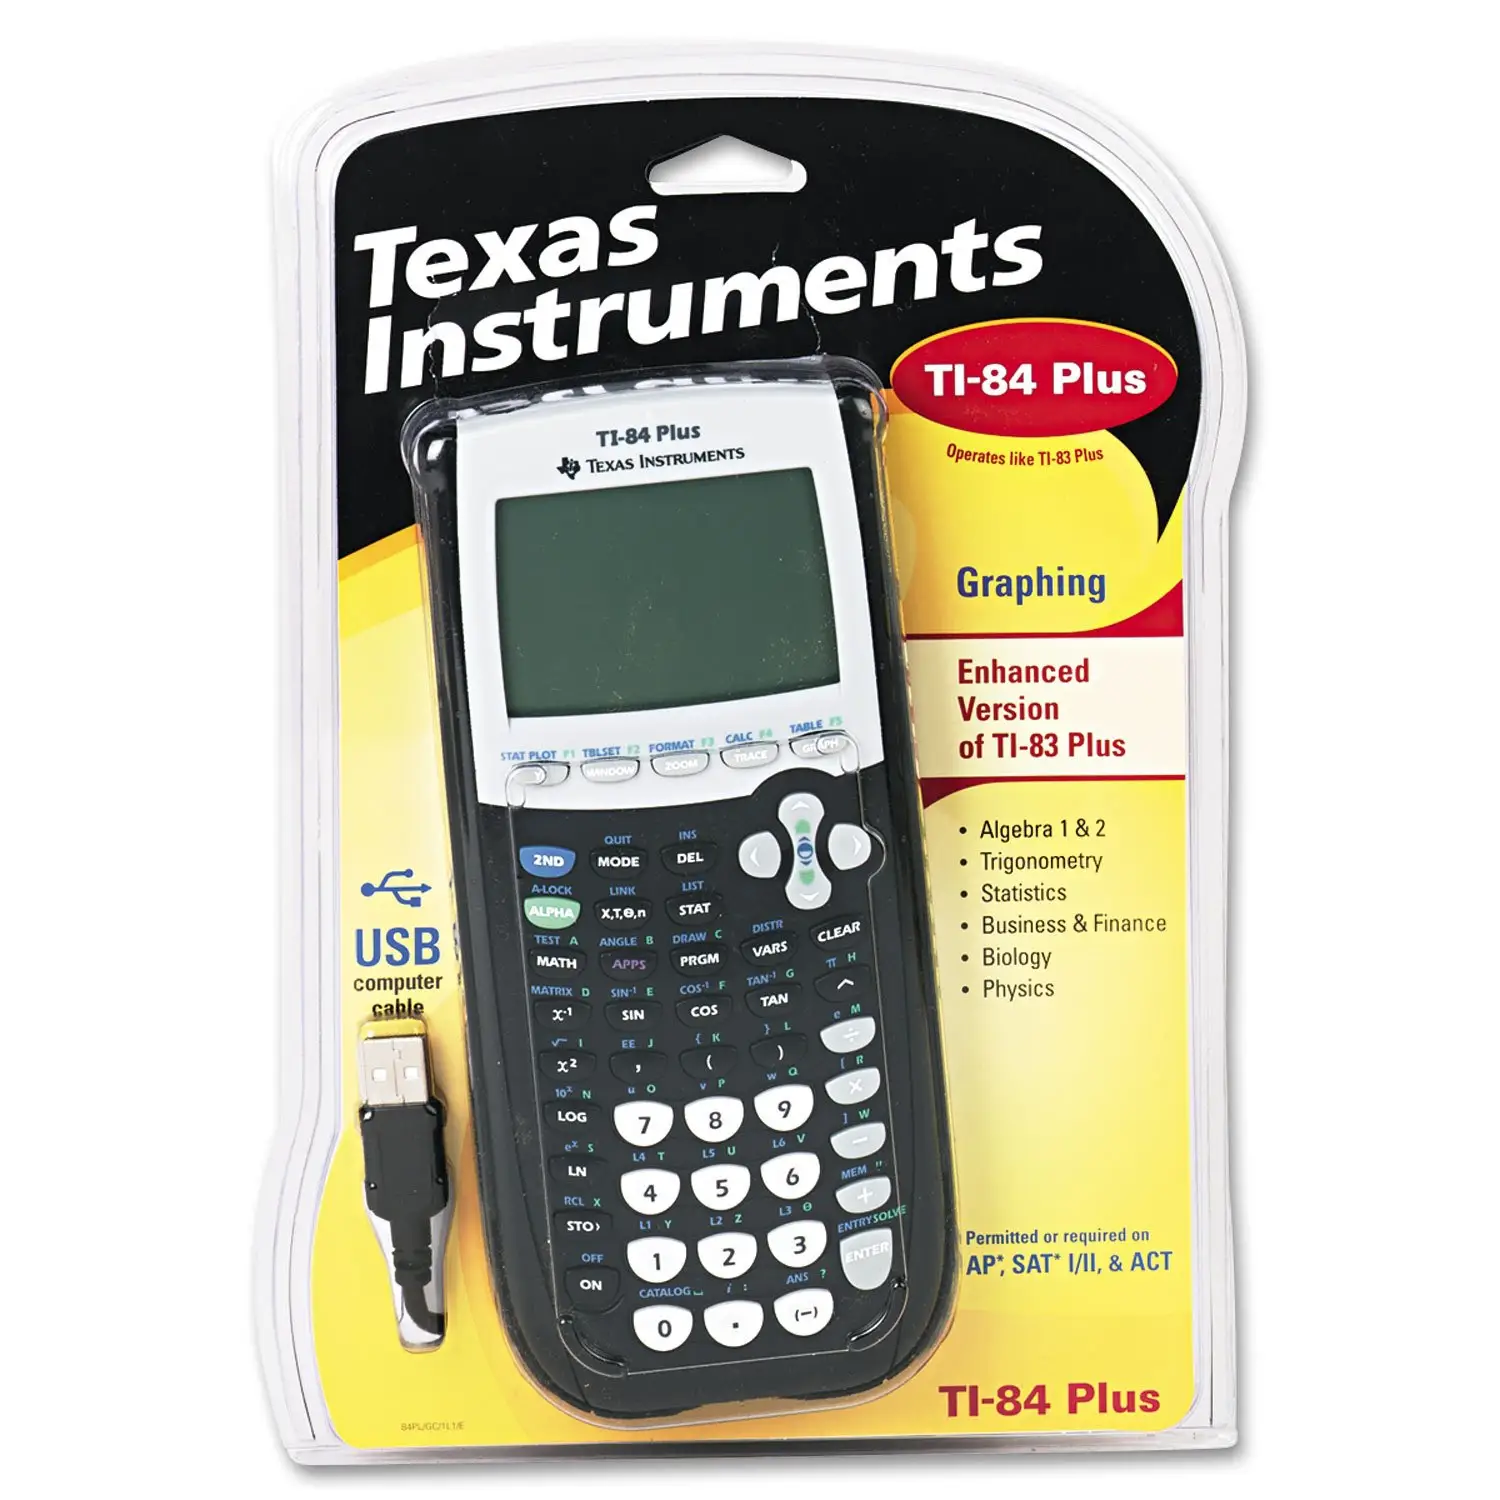 100% Authentic Texas Instruments Ti-84 Plus Graphics Calculator For Sale With Complete Parts And Accessories Worldwide